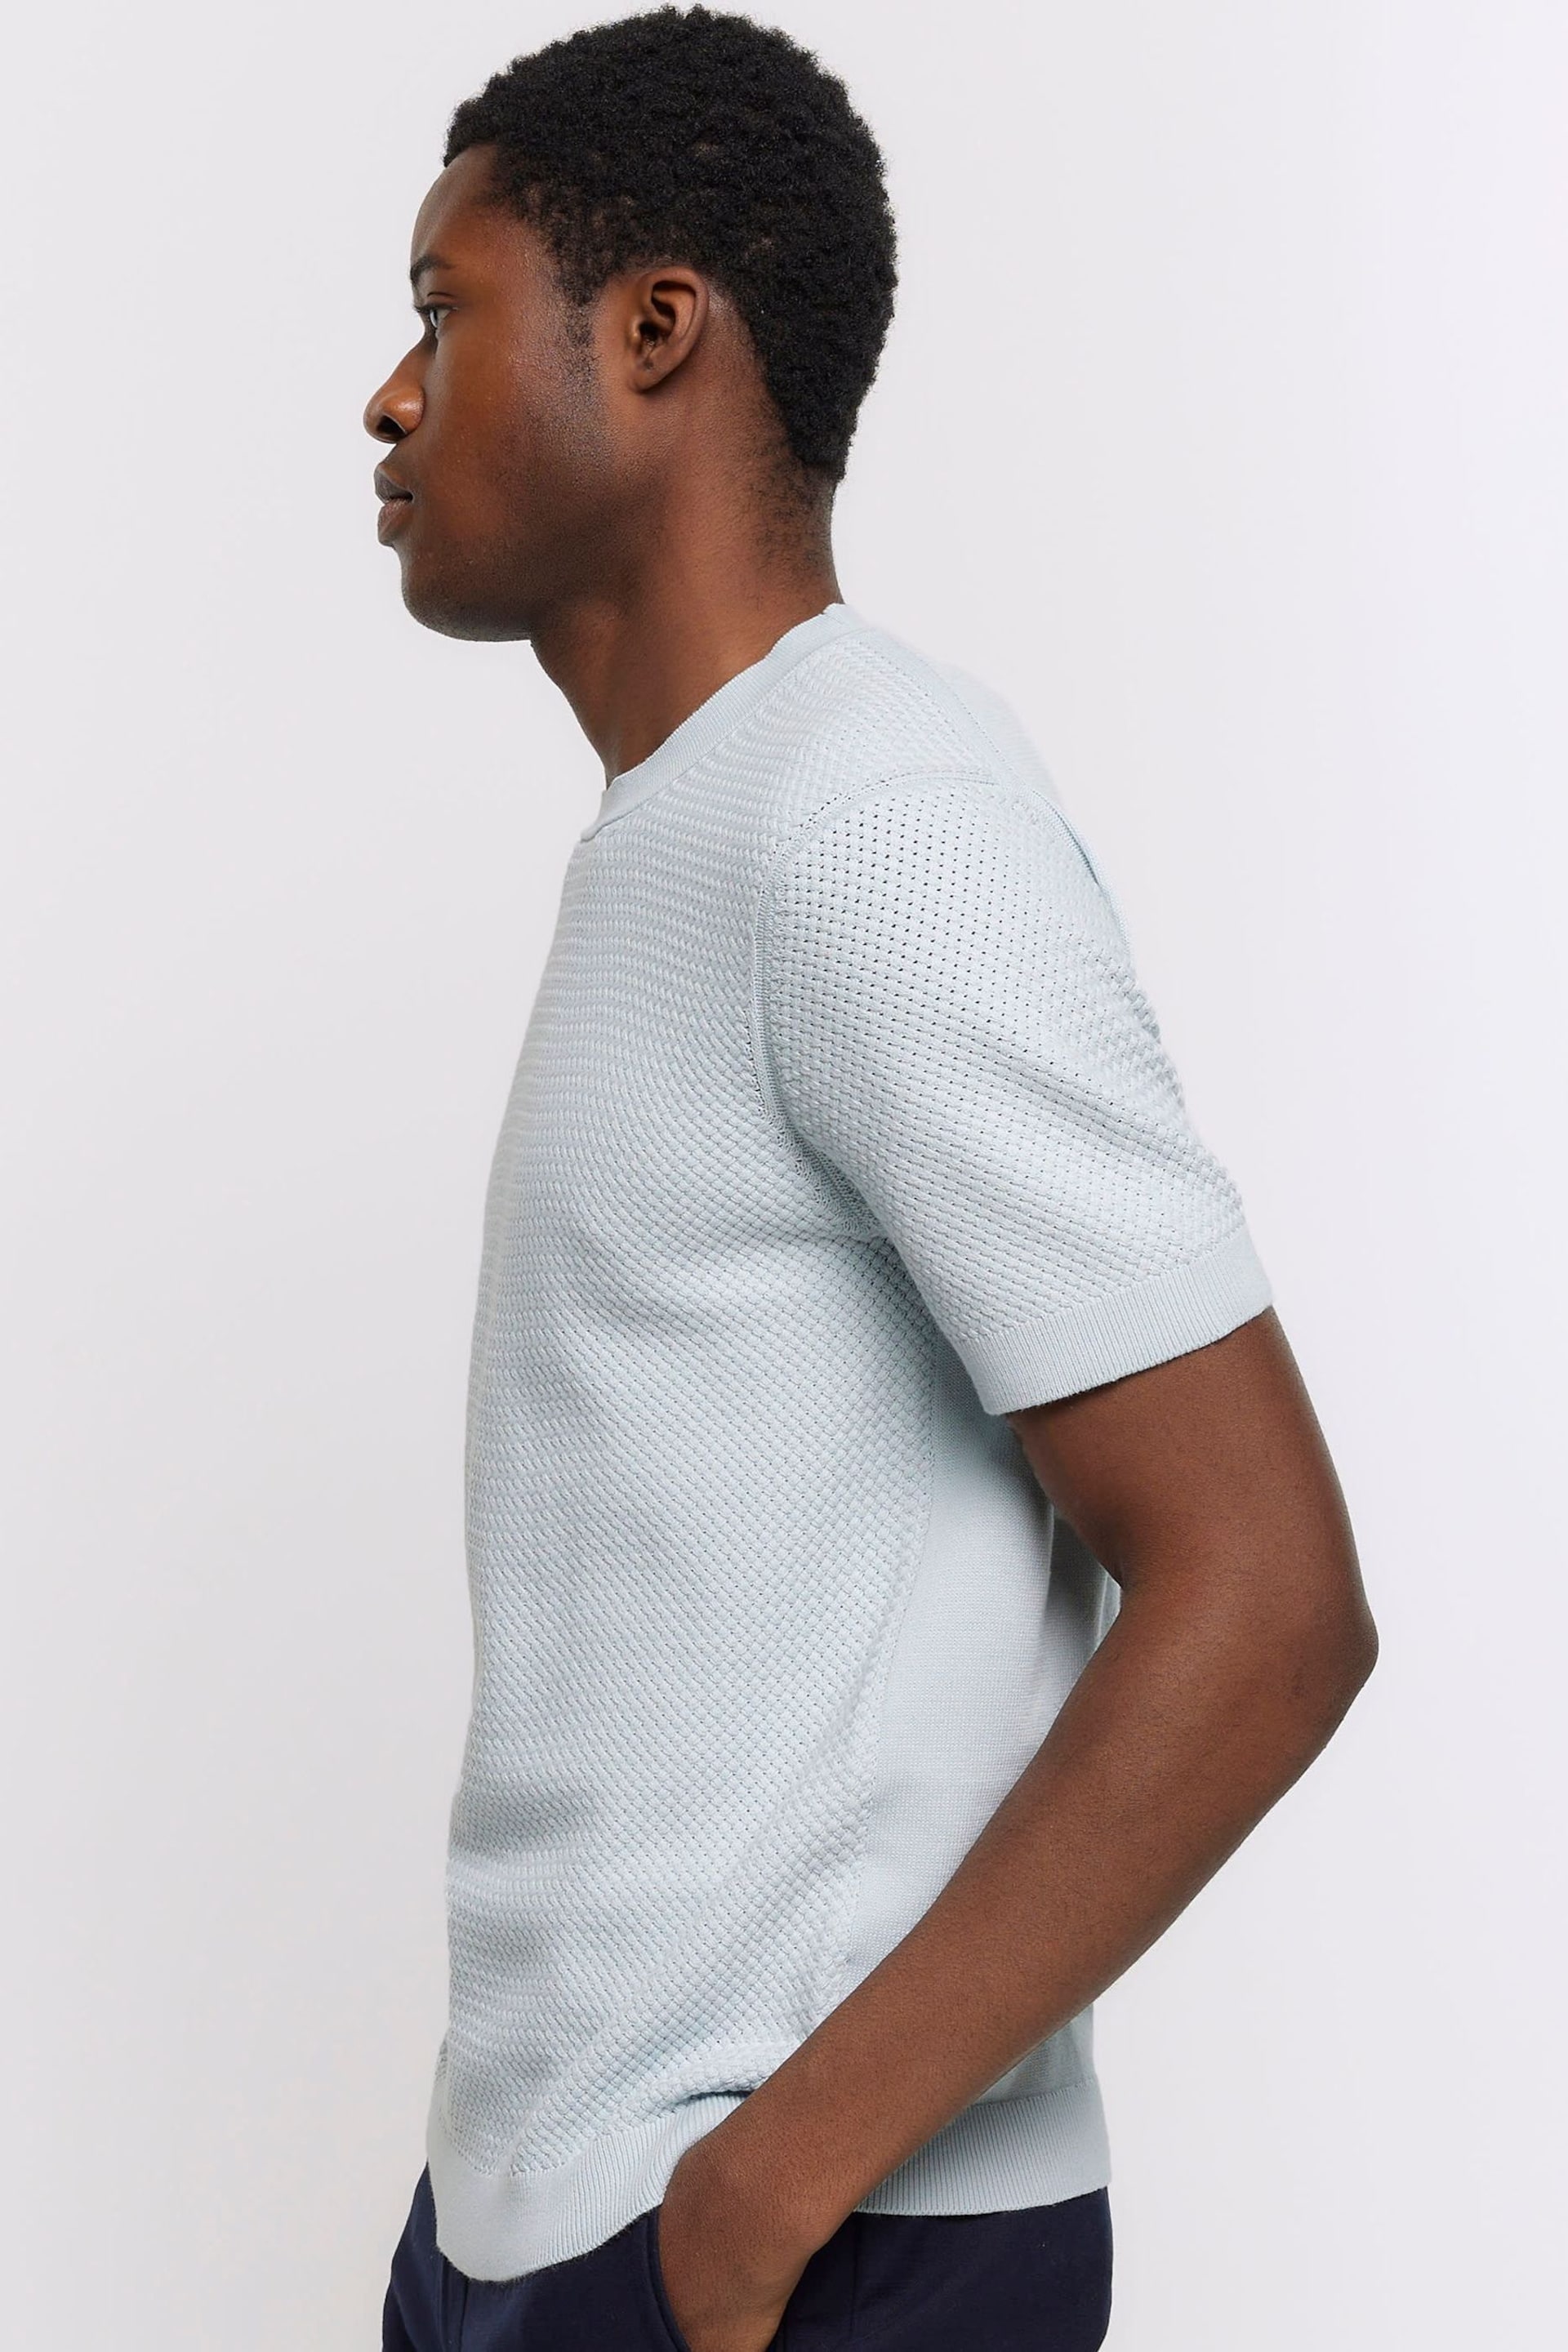 River Island Blue Textured Knitted T-Shirt - Image 3 of 5